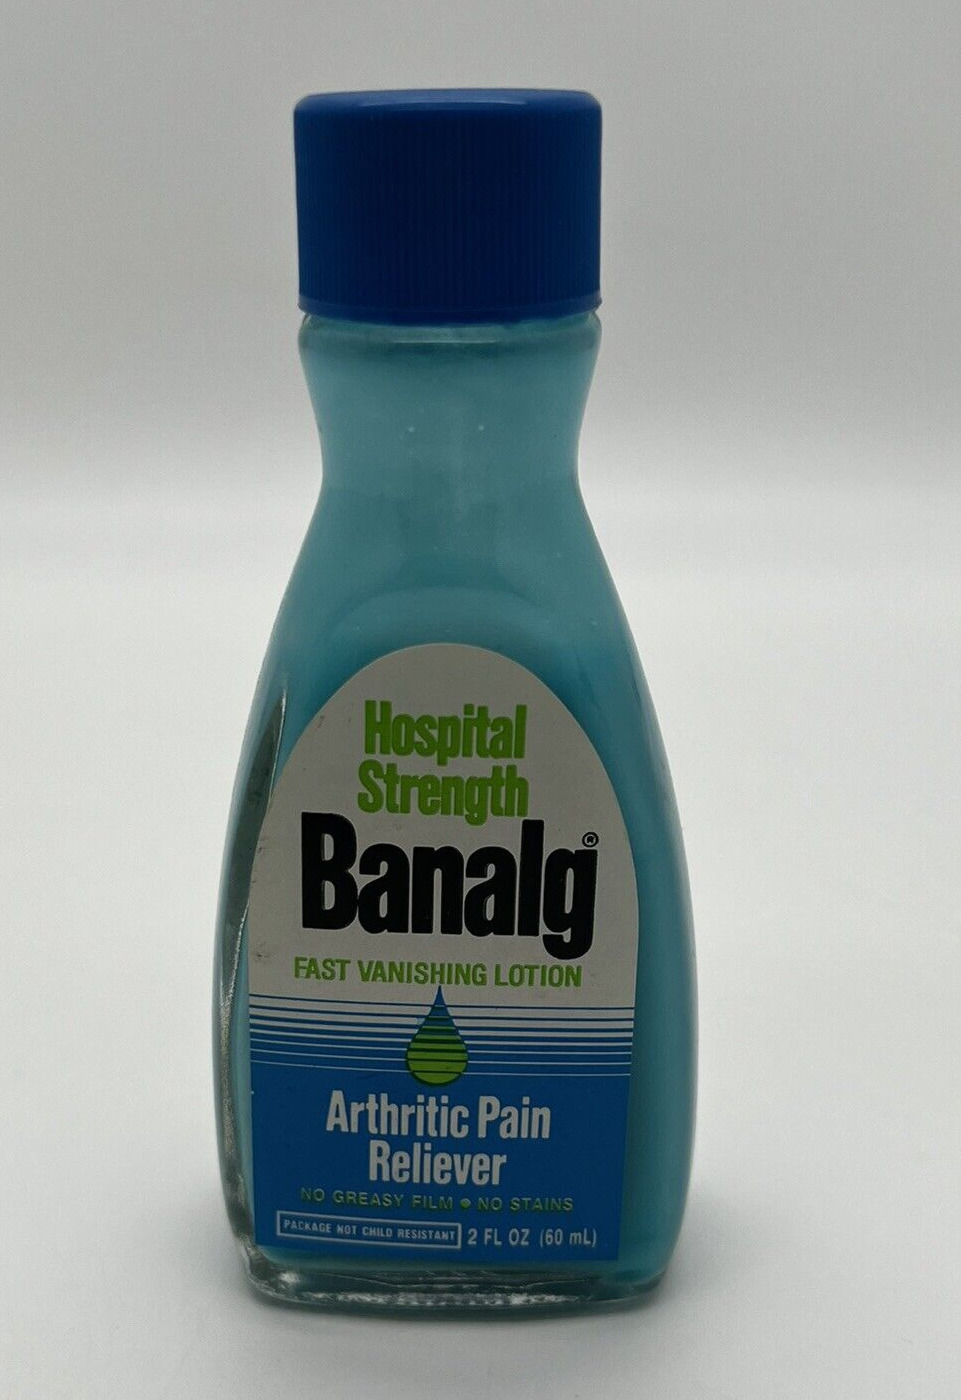 Banalg Arthritis Muscle Pain Reliever Lotion 2 fl oz Discontinued Collectible